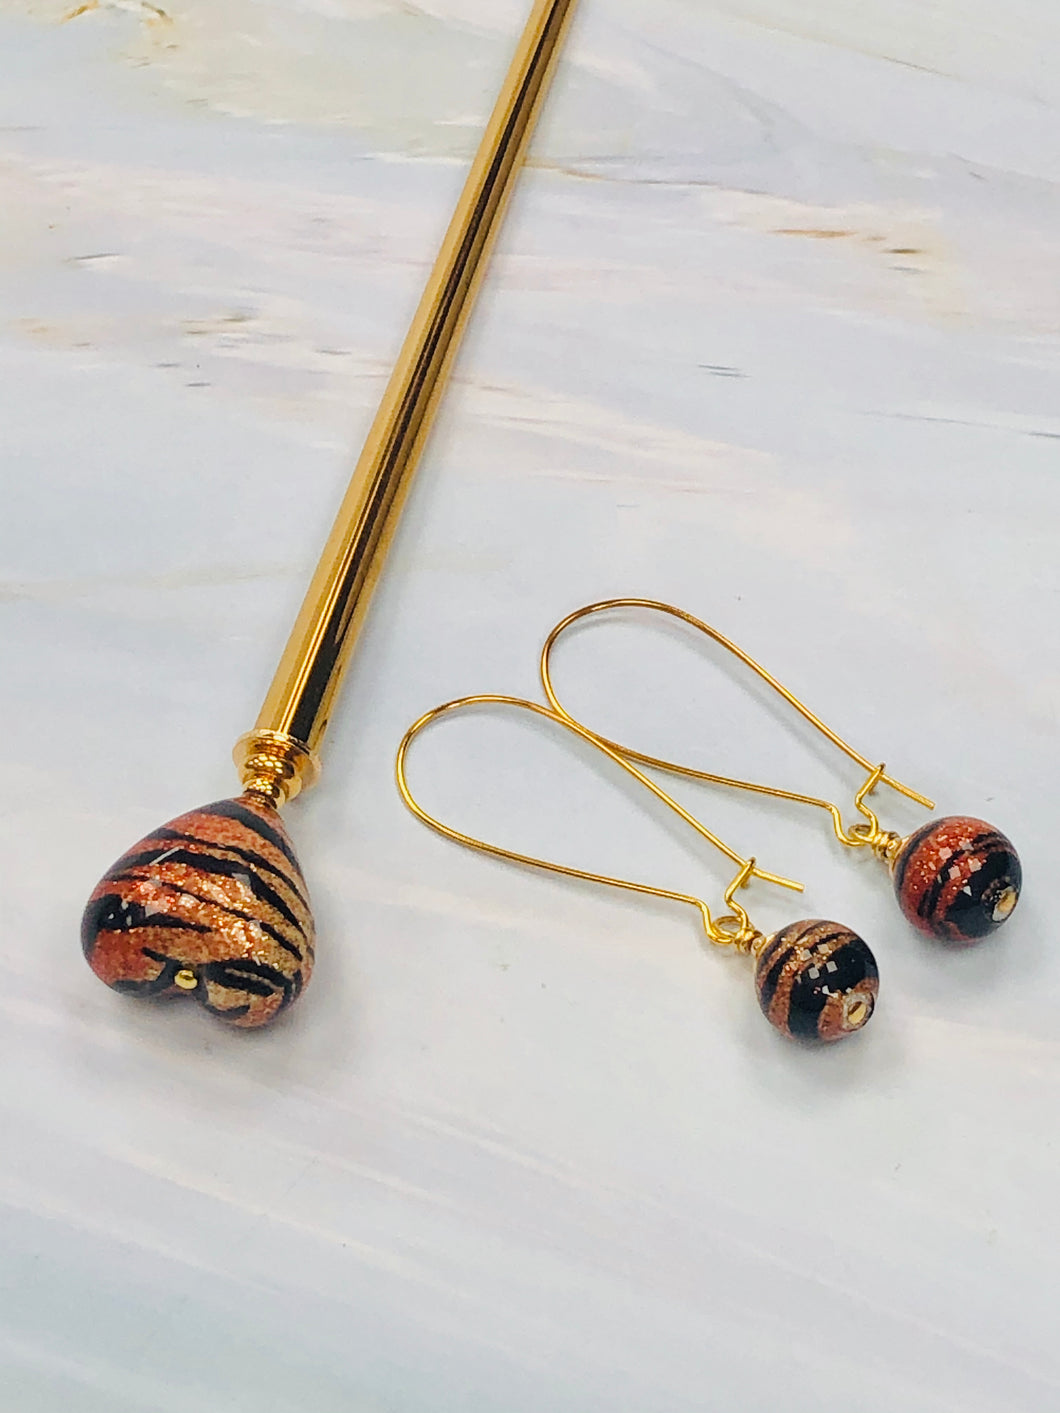 Askin' for a Baskin Tiger Art Glass hair stick, unique hair stick and earrings set